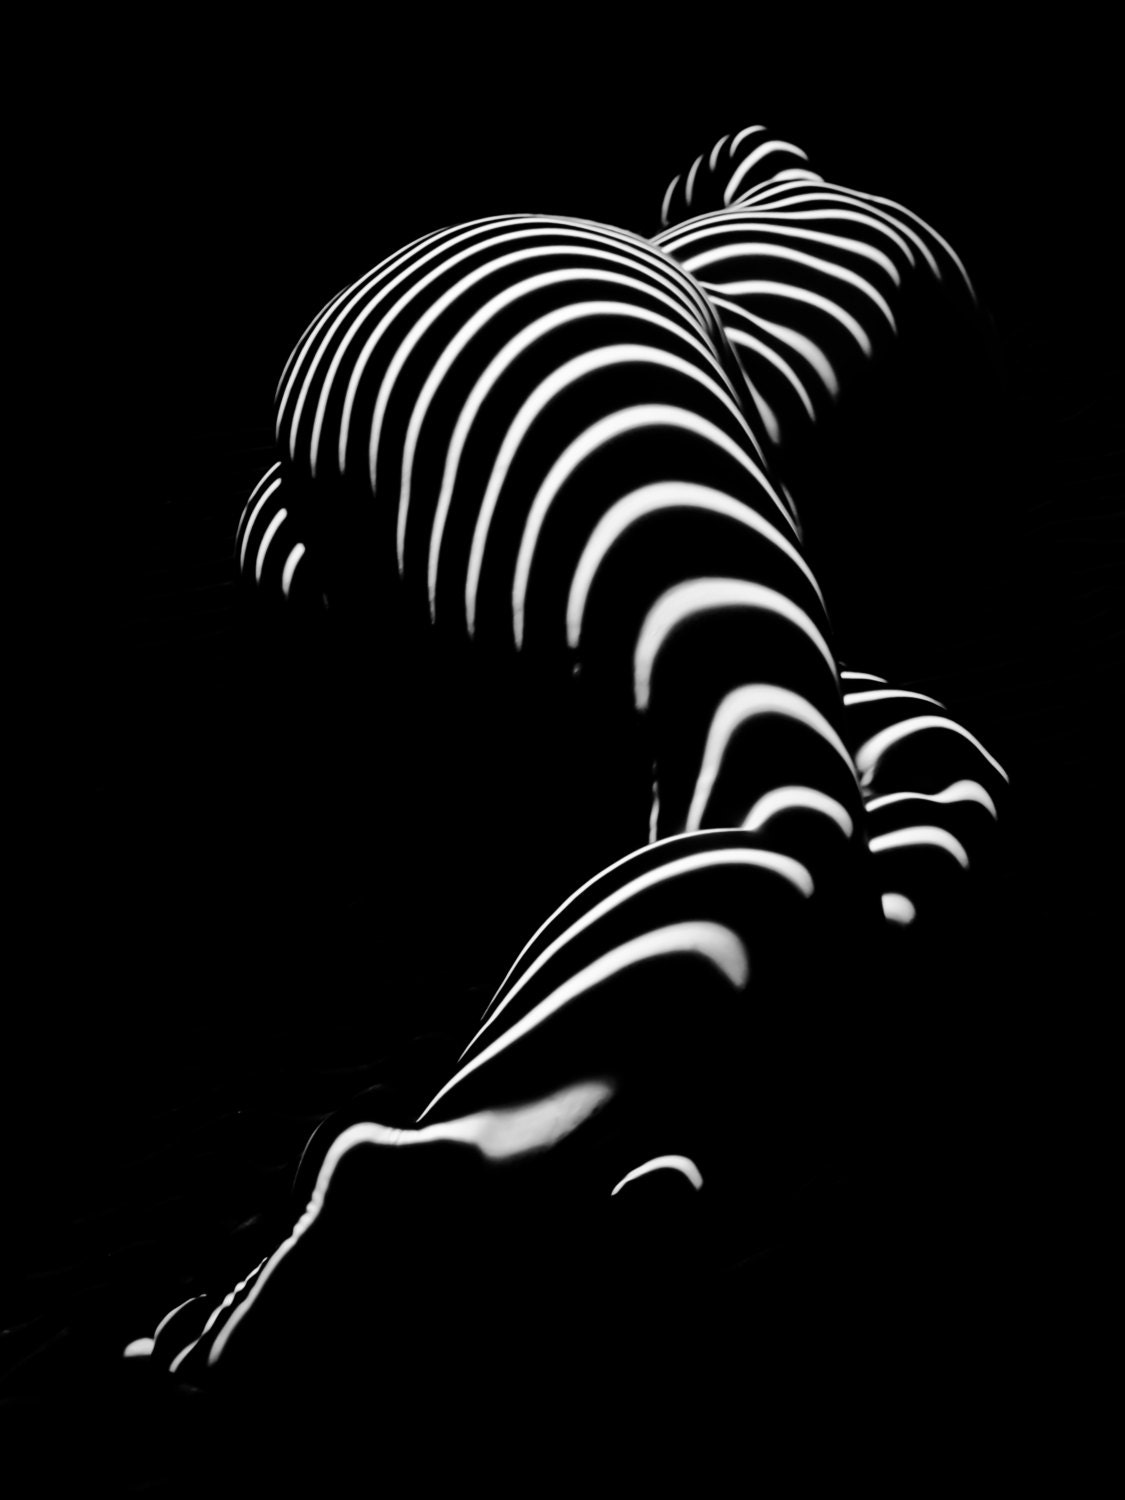 H Stripe Series One Sensual Zebra Woman Abstract Black White Nude 1 to 3 Ratio Photograph by 